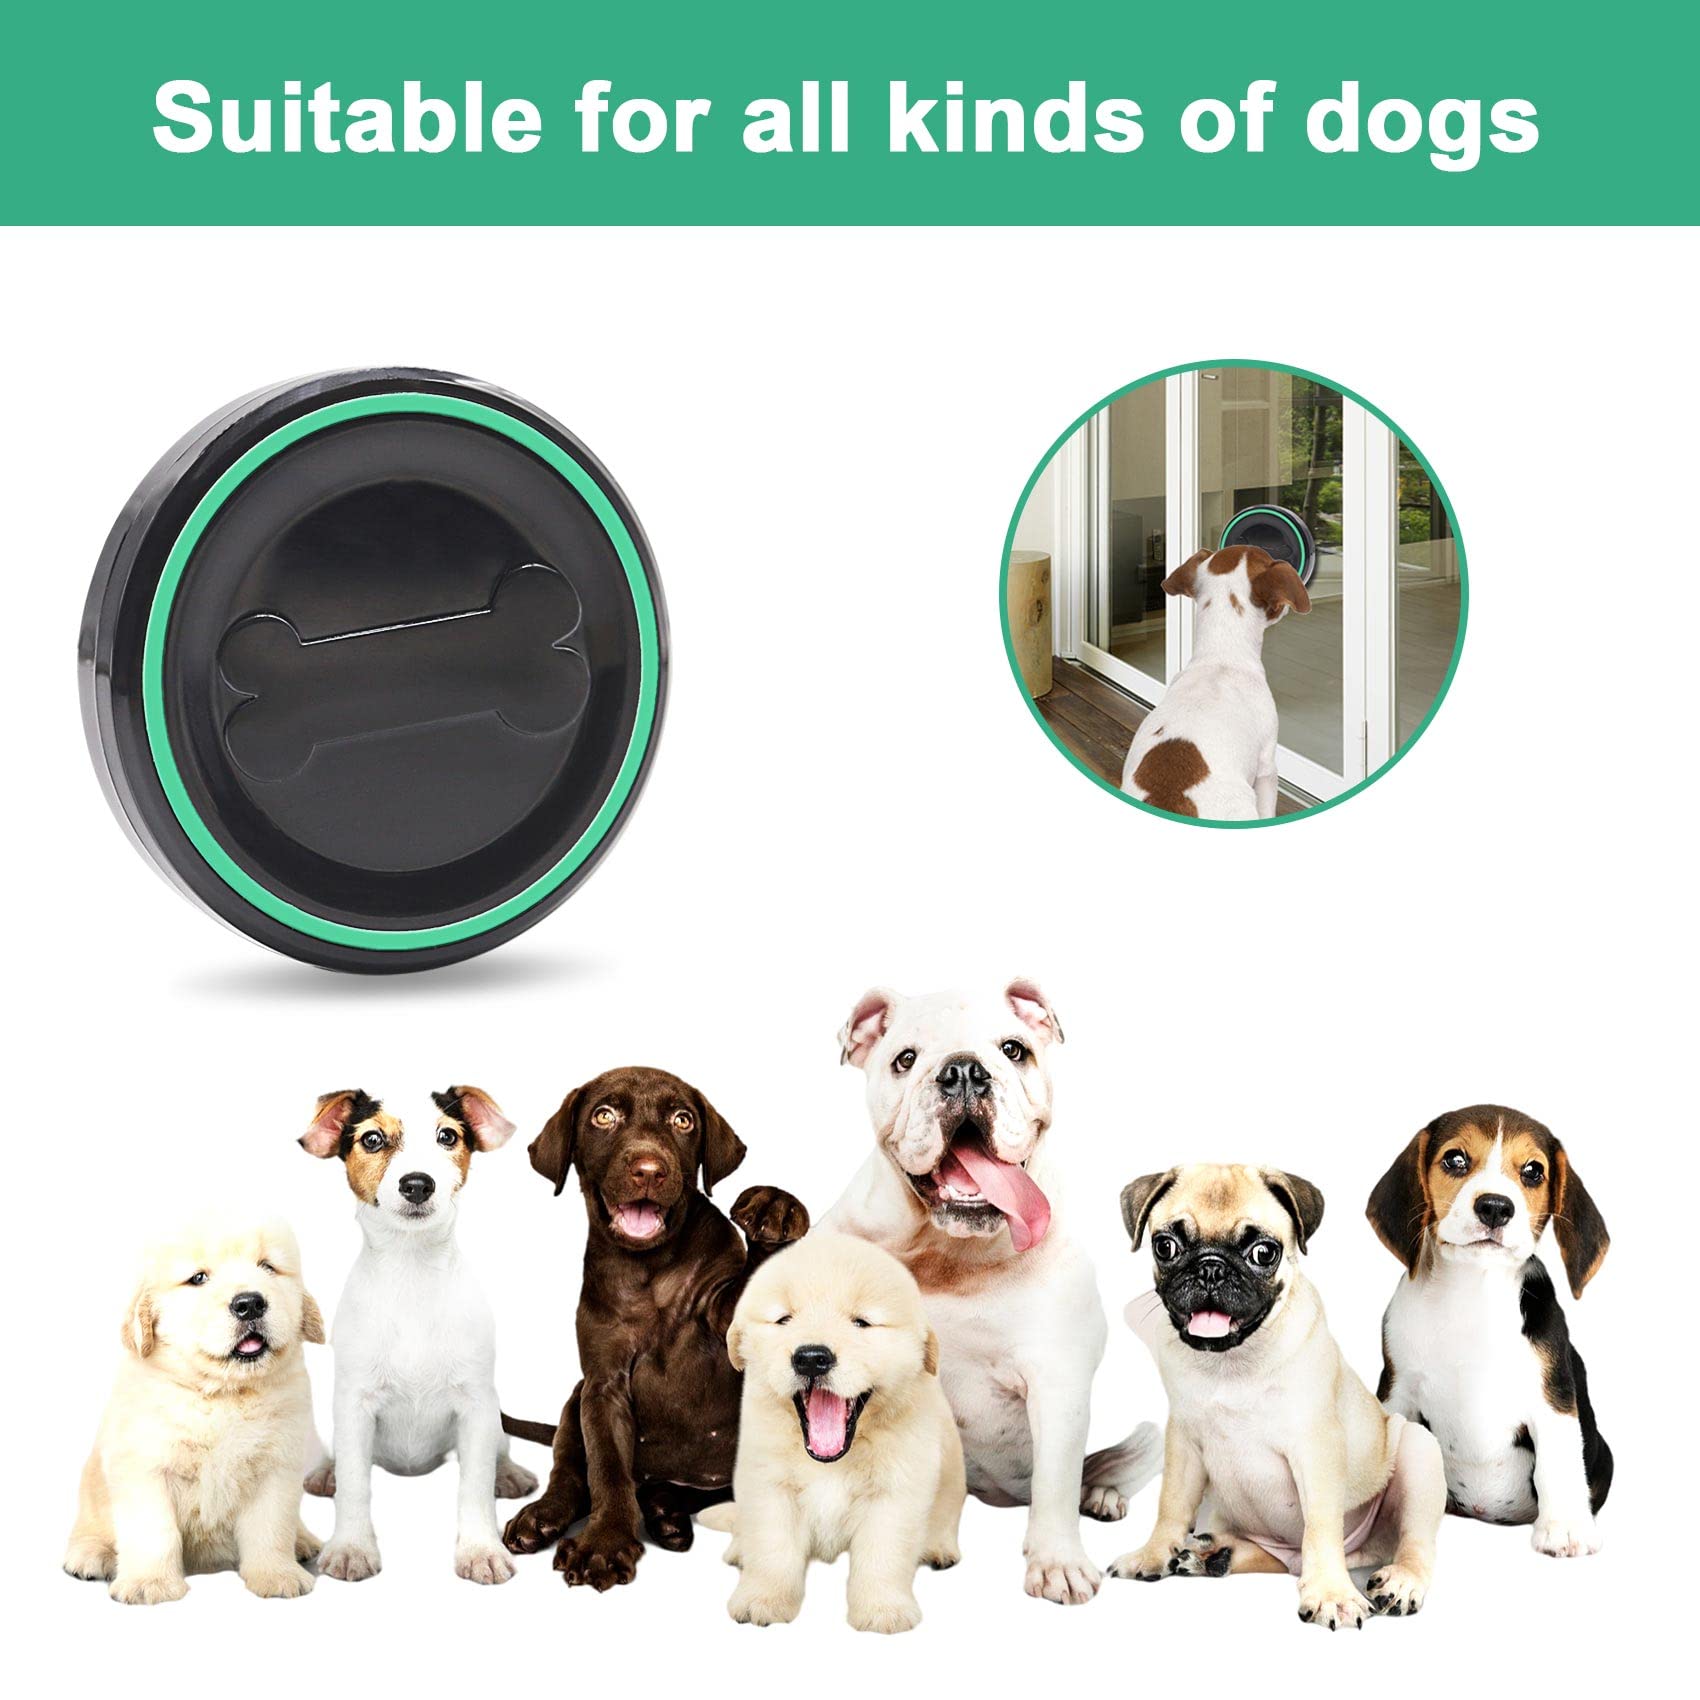 Daytech Dog Door Bell Smart Doggy Doorbell for Potty Training Go Outside/Housebreaking 4 Waterproof Touch Buttons 1 Number Display Receivers